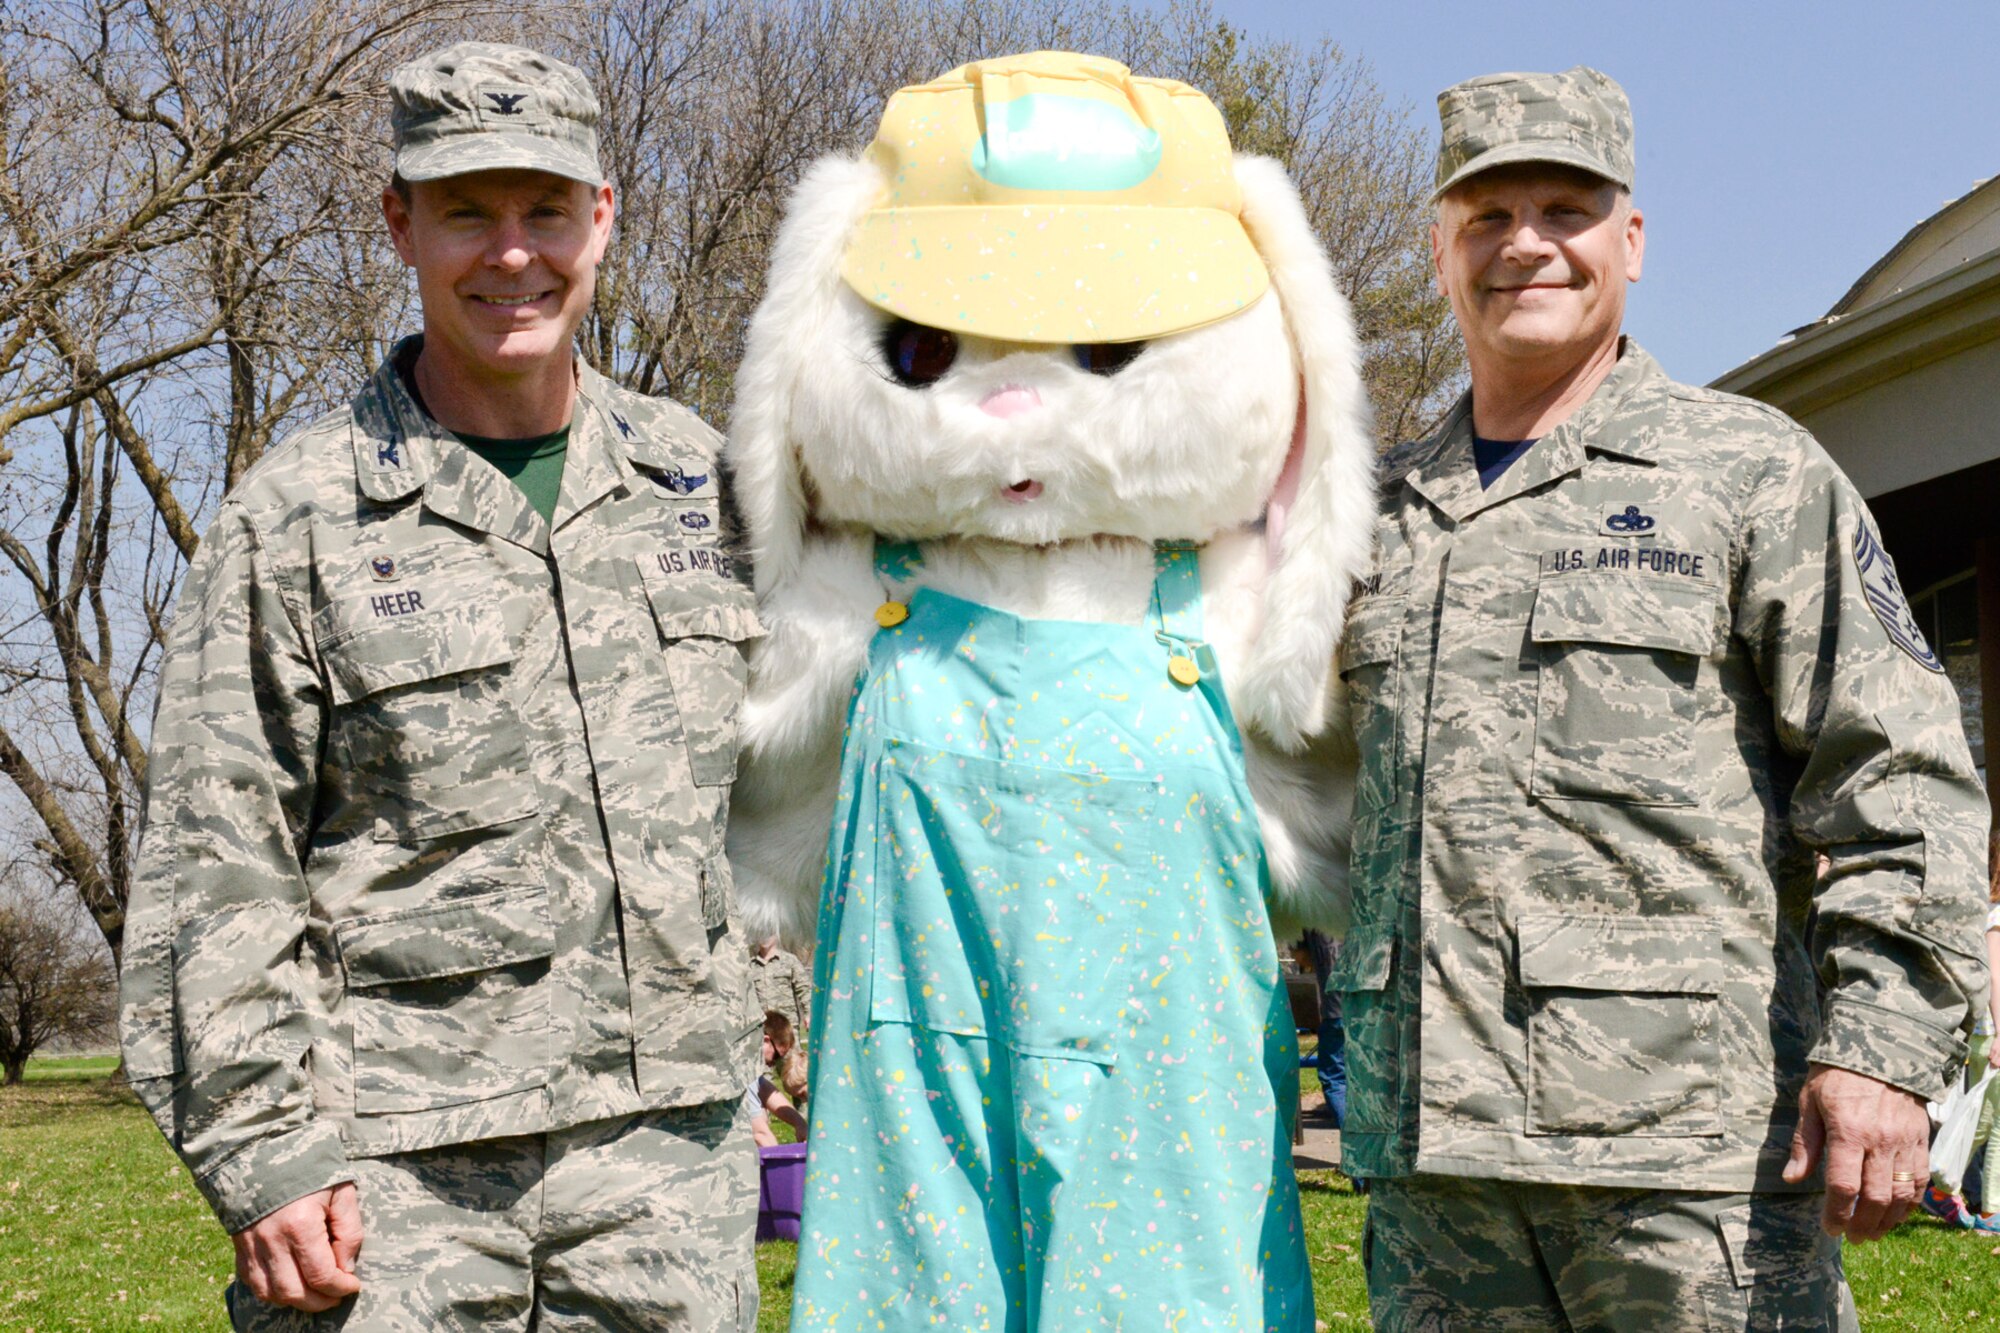 Col. Kevin Heer (left), 132d Wing (132WG), Des Moines, Iowa Commander, and Chief Master Sgt. Timothy Cochran (right), 132WG Command Chief, pose for a photo with the Easter Bunny during the 2015 Annual Easter Egg Hunt held outside of the Dining Facility of the 132WG on Saturday, April 11, 2015.  (U.S. Air National Guard photo by Tech. Sgt. Michael B. McGhee/Released)